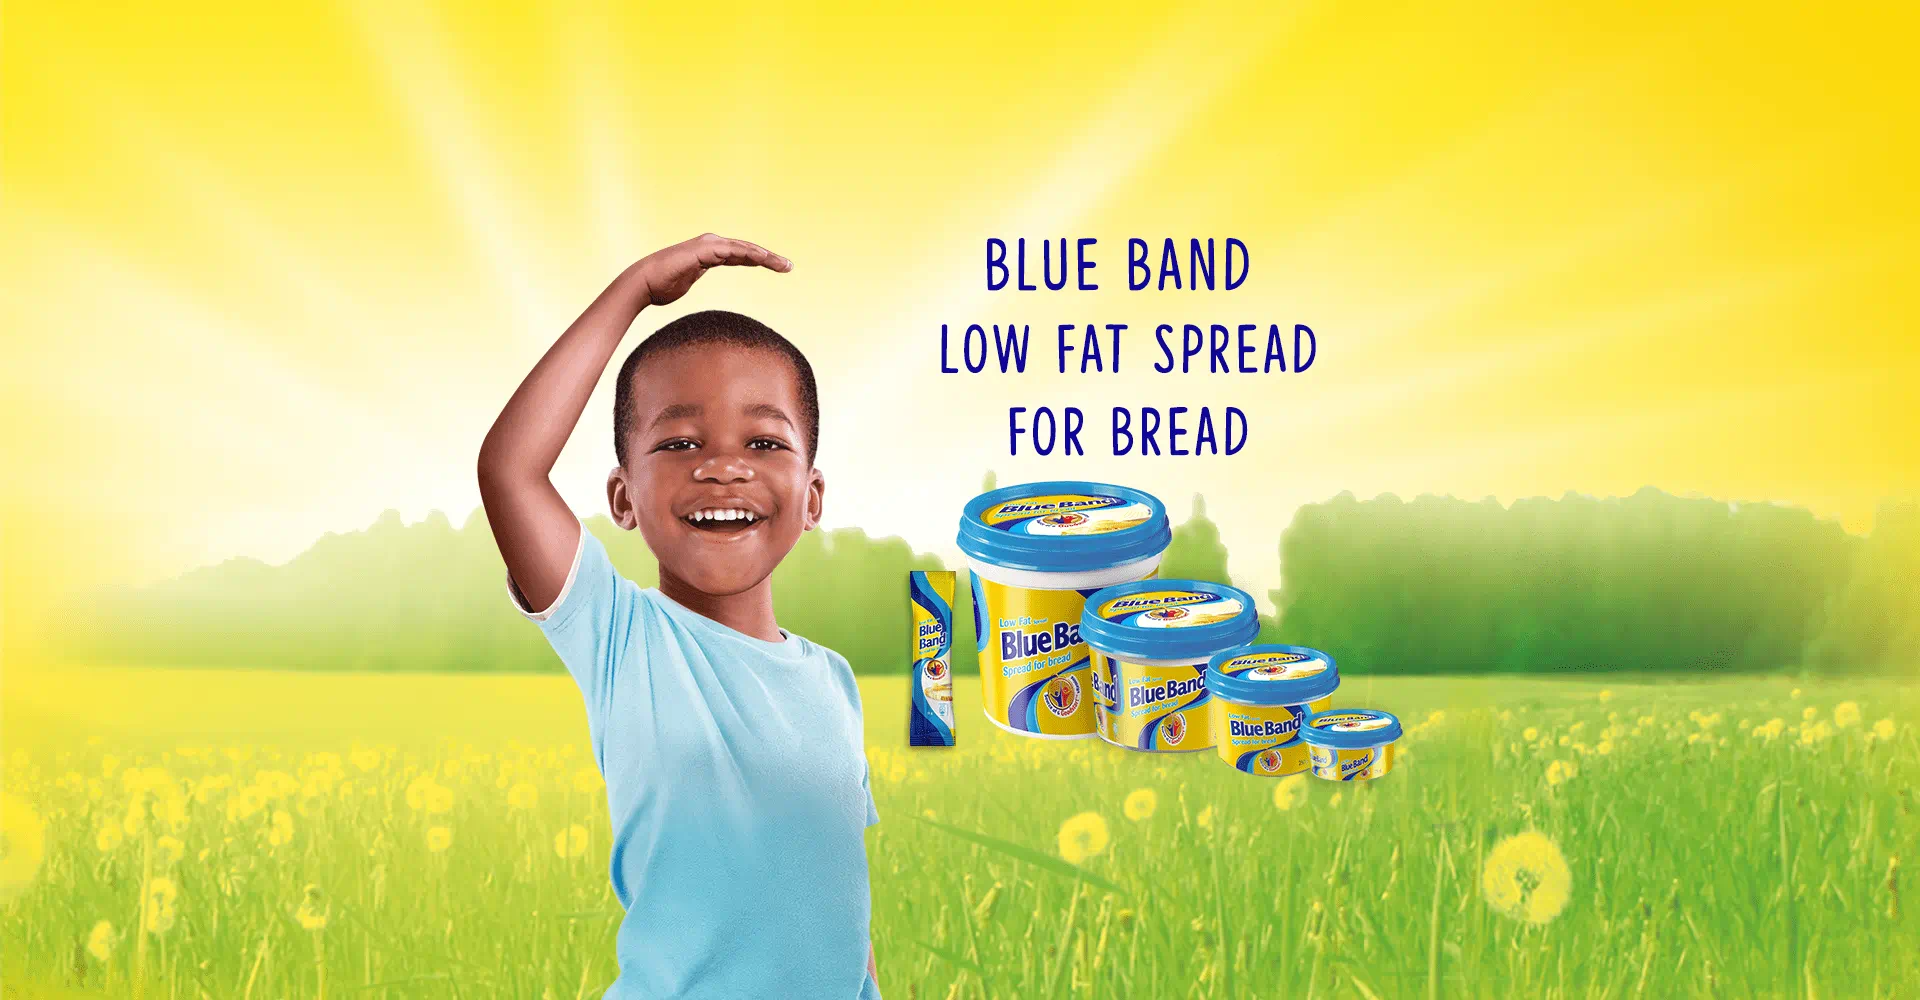 Blue Band Low Fat Spread for Bread